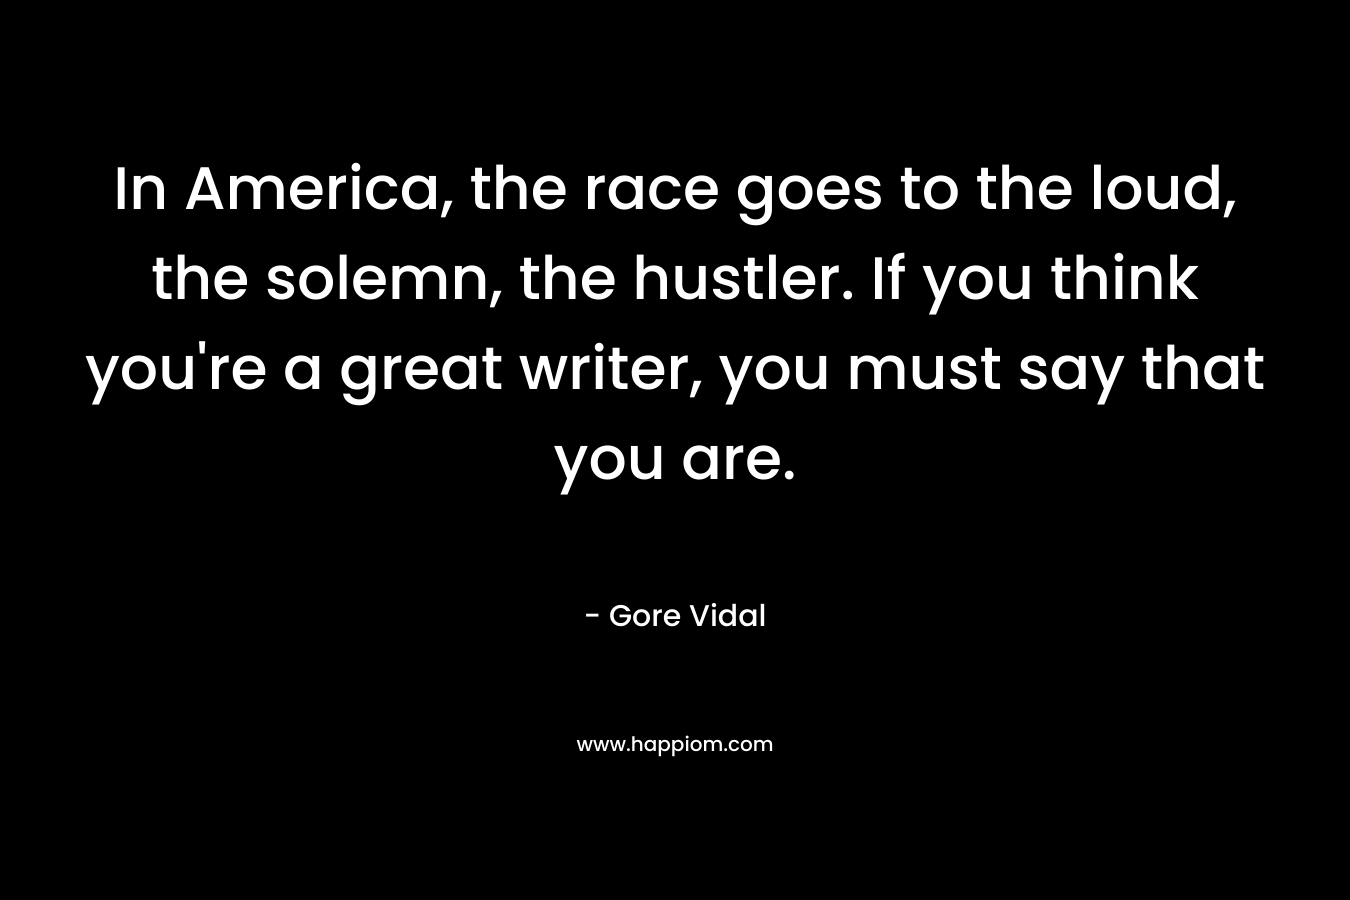 In America, the race goes to the loud, the solemn, the hustler. If you think you're a great writer, you must say that you are.